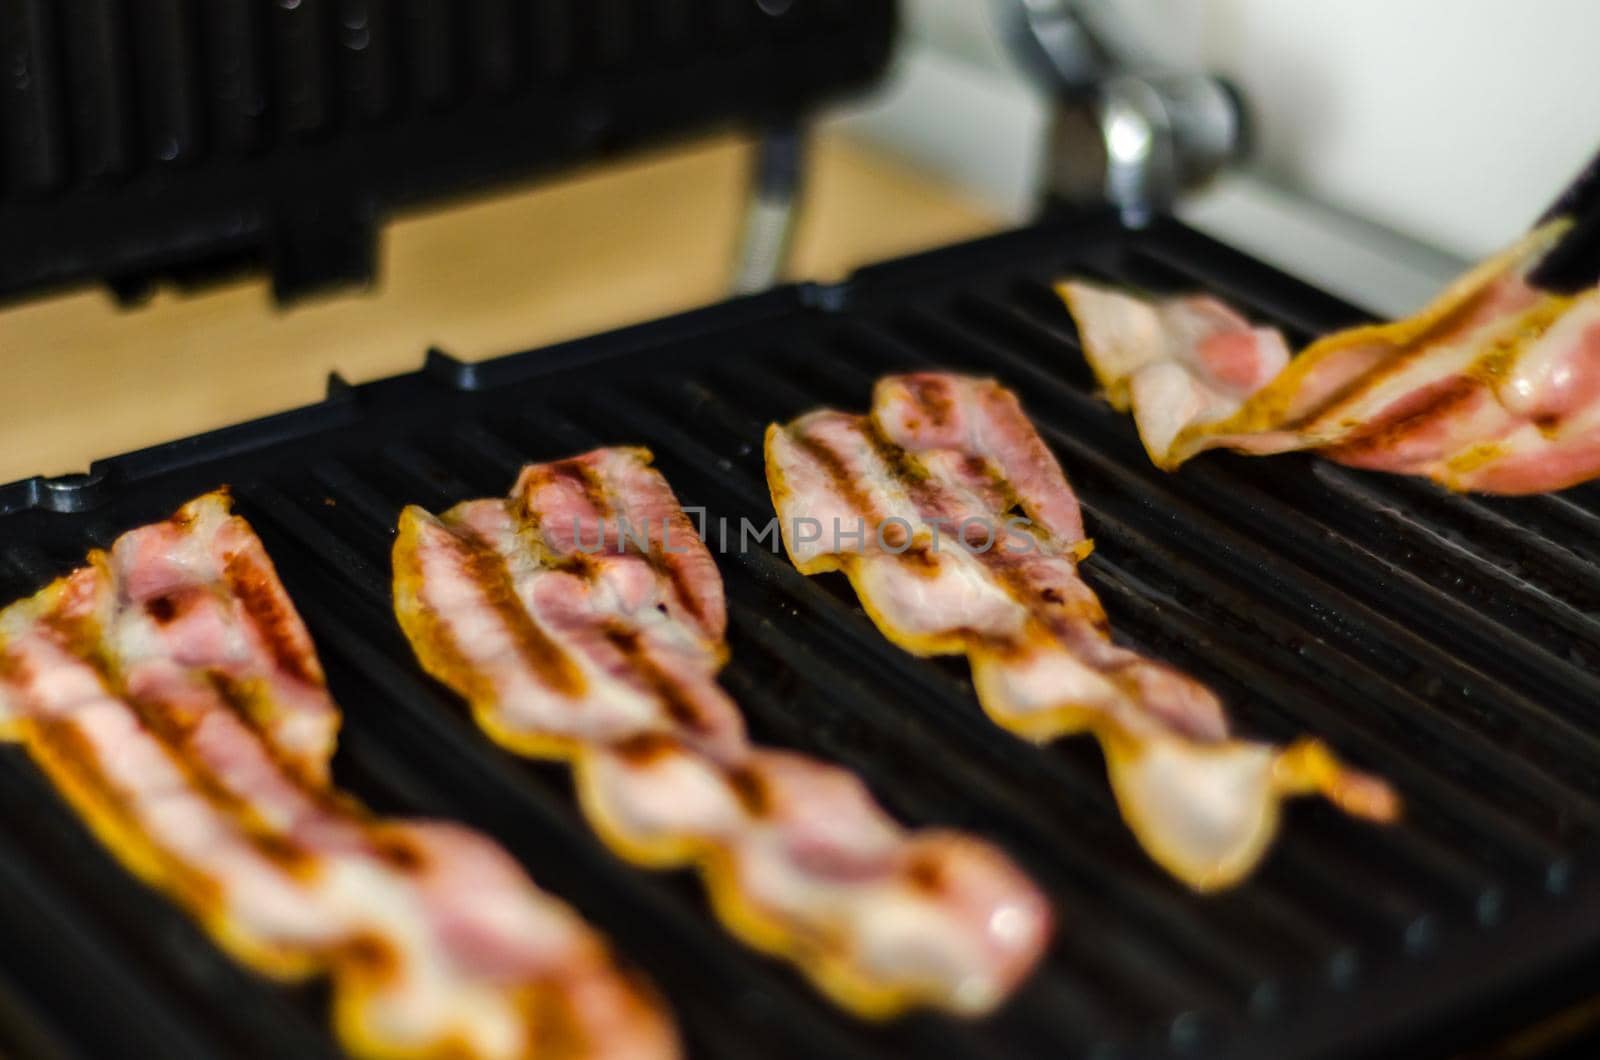 thin slices of delicious bacon fried on the grill, crispy and delicate meat by Q77photo